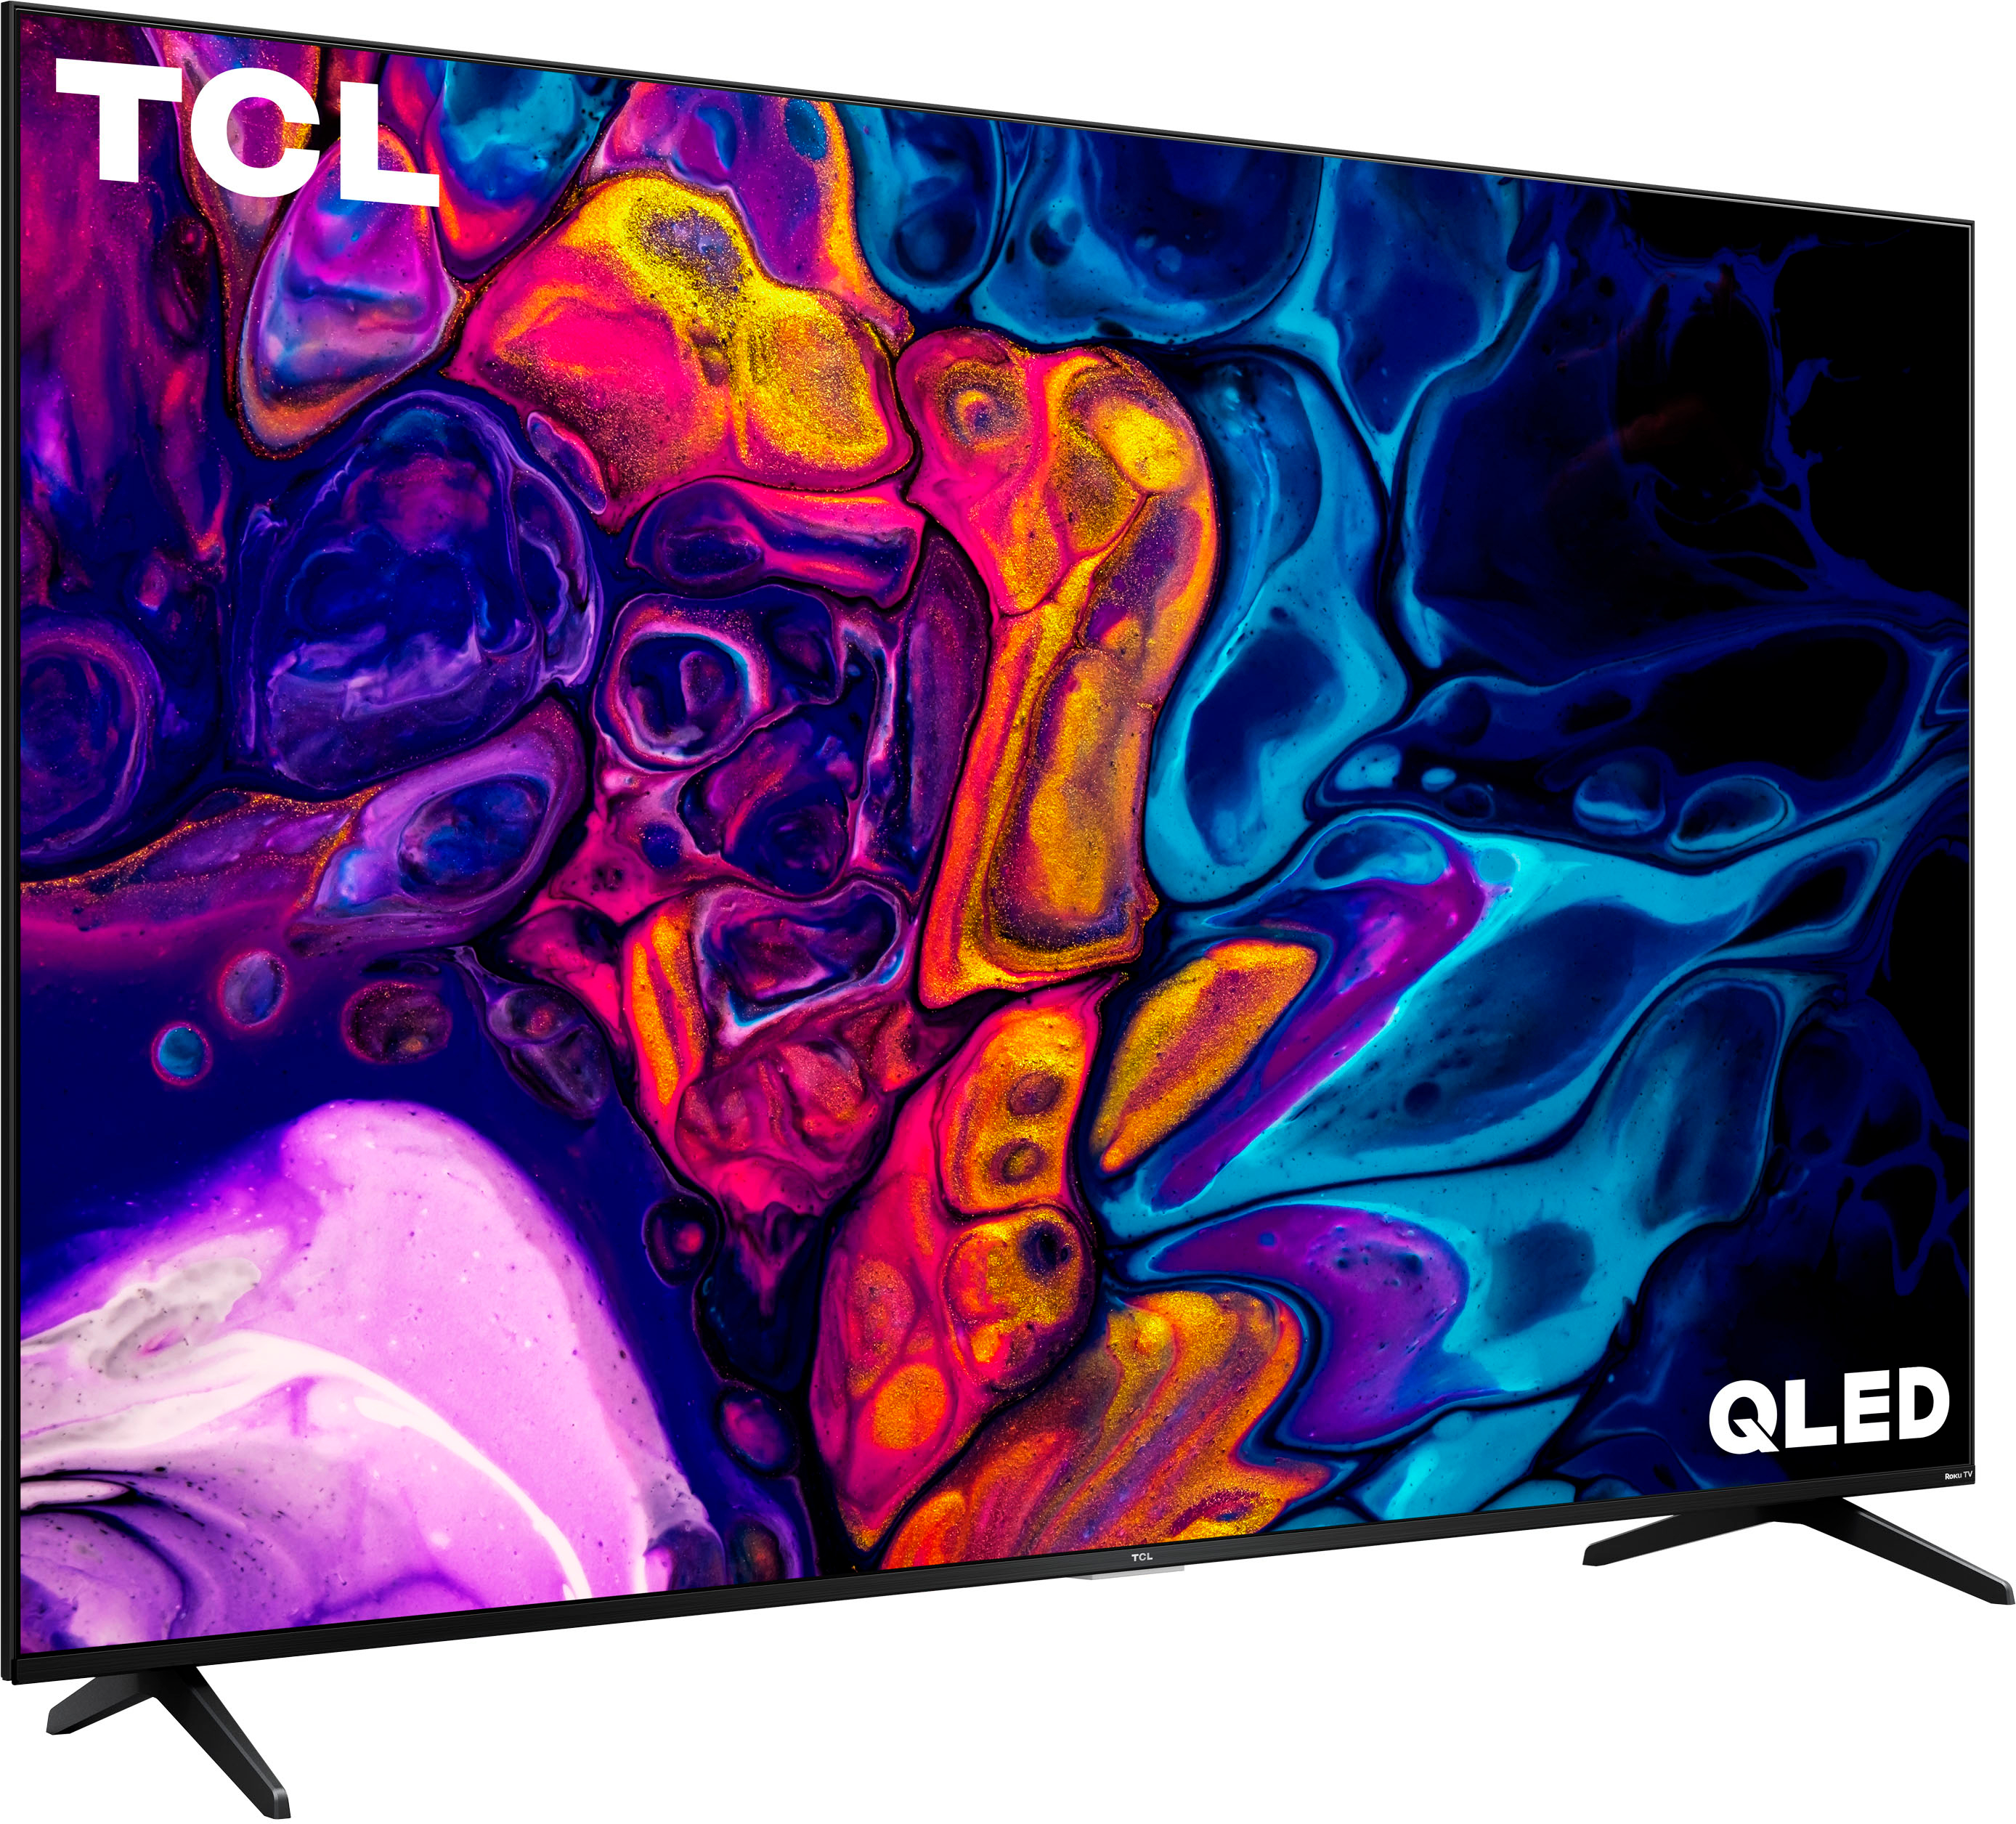 Ends midnight: Get this 50-inch TCL QLED 4K TV for only $270